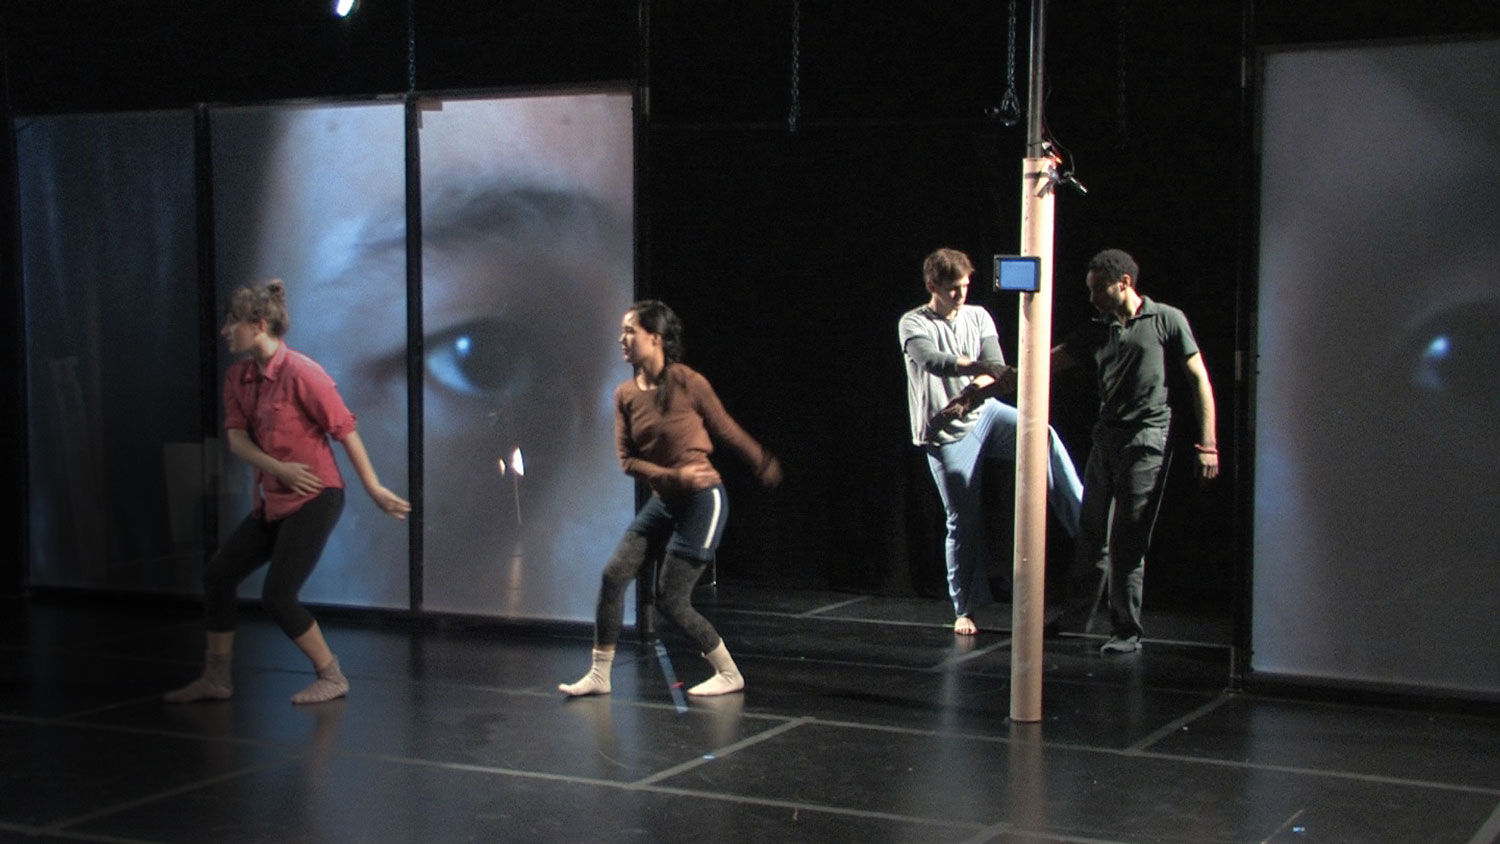 Four dancers wearing street clothes dancing in front of a large projection of a human eye on a black stage. 